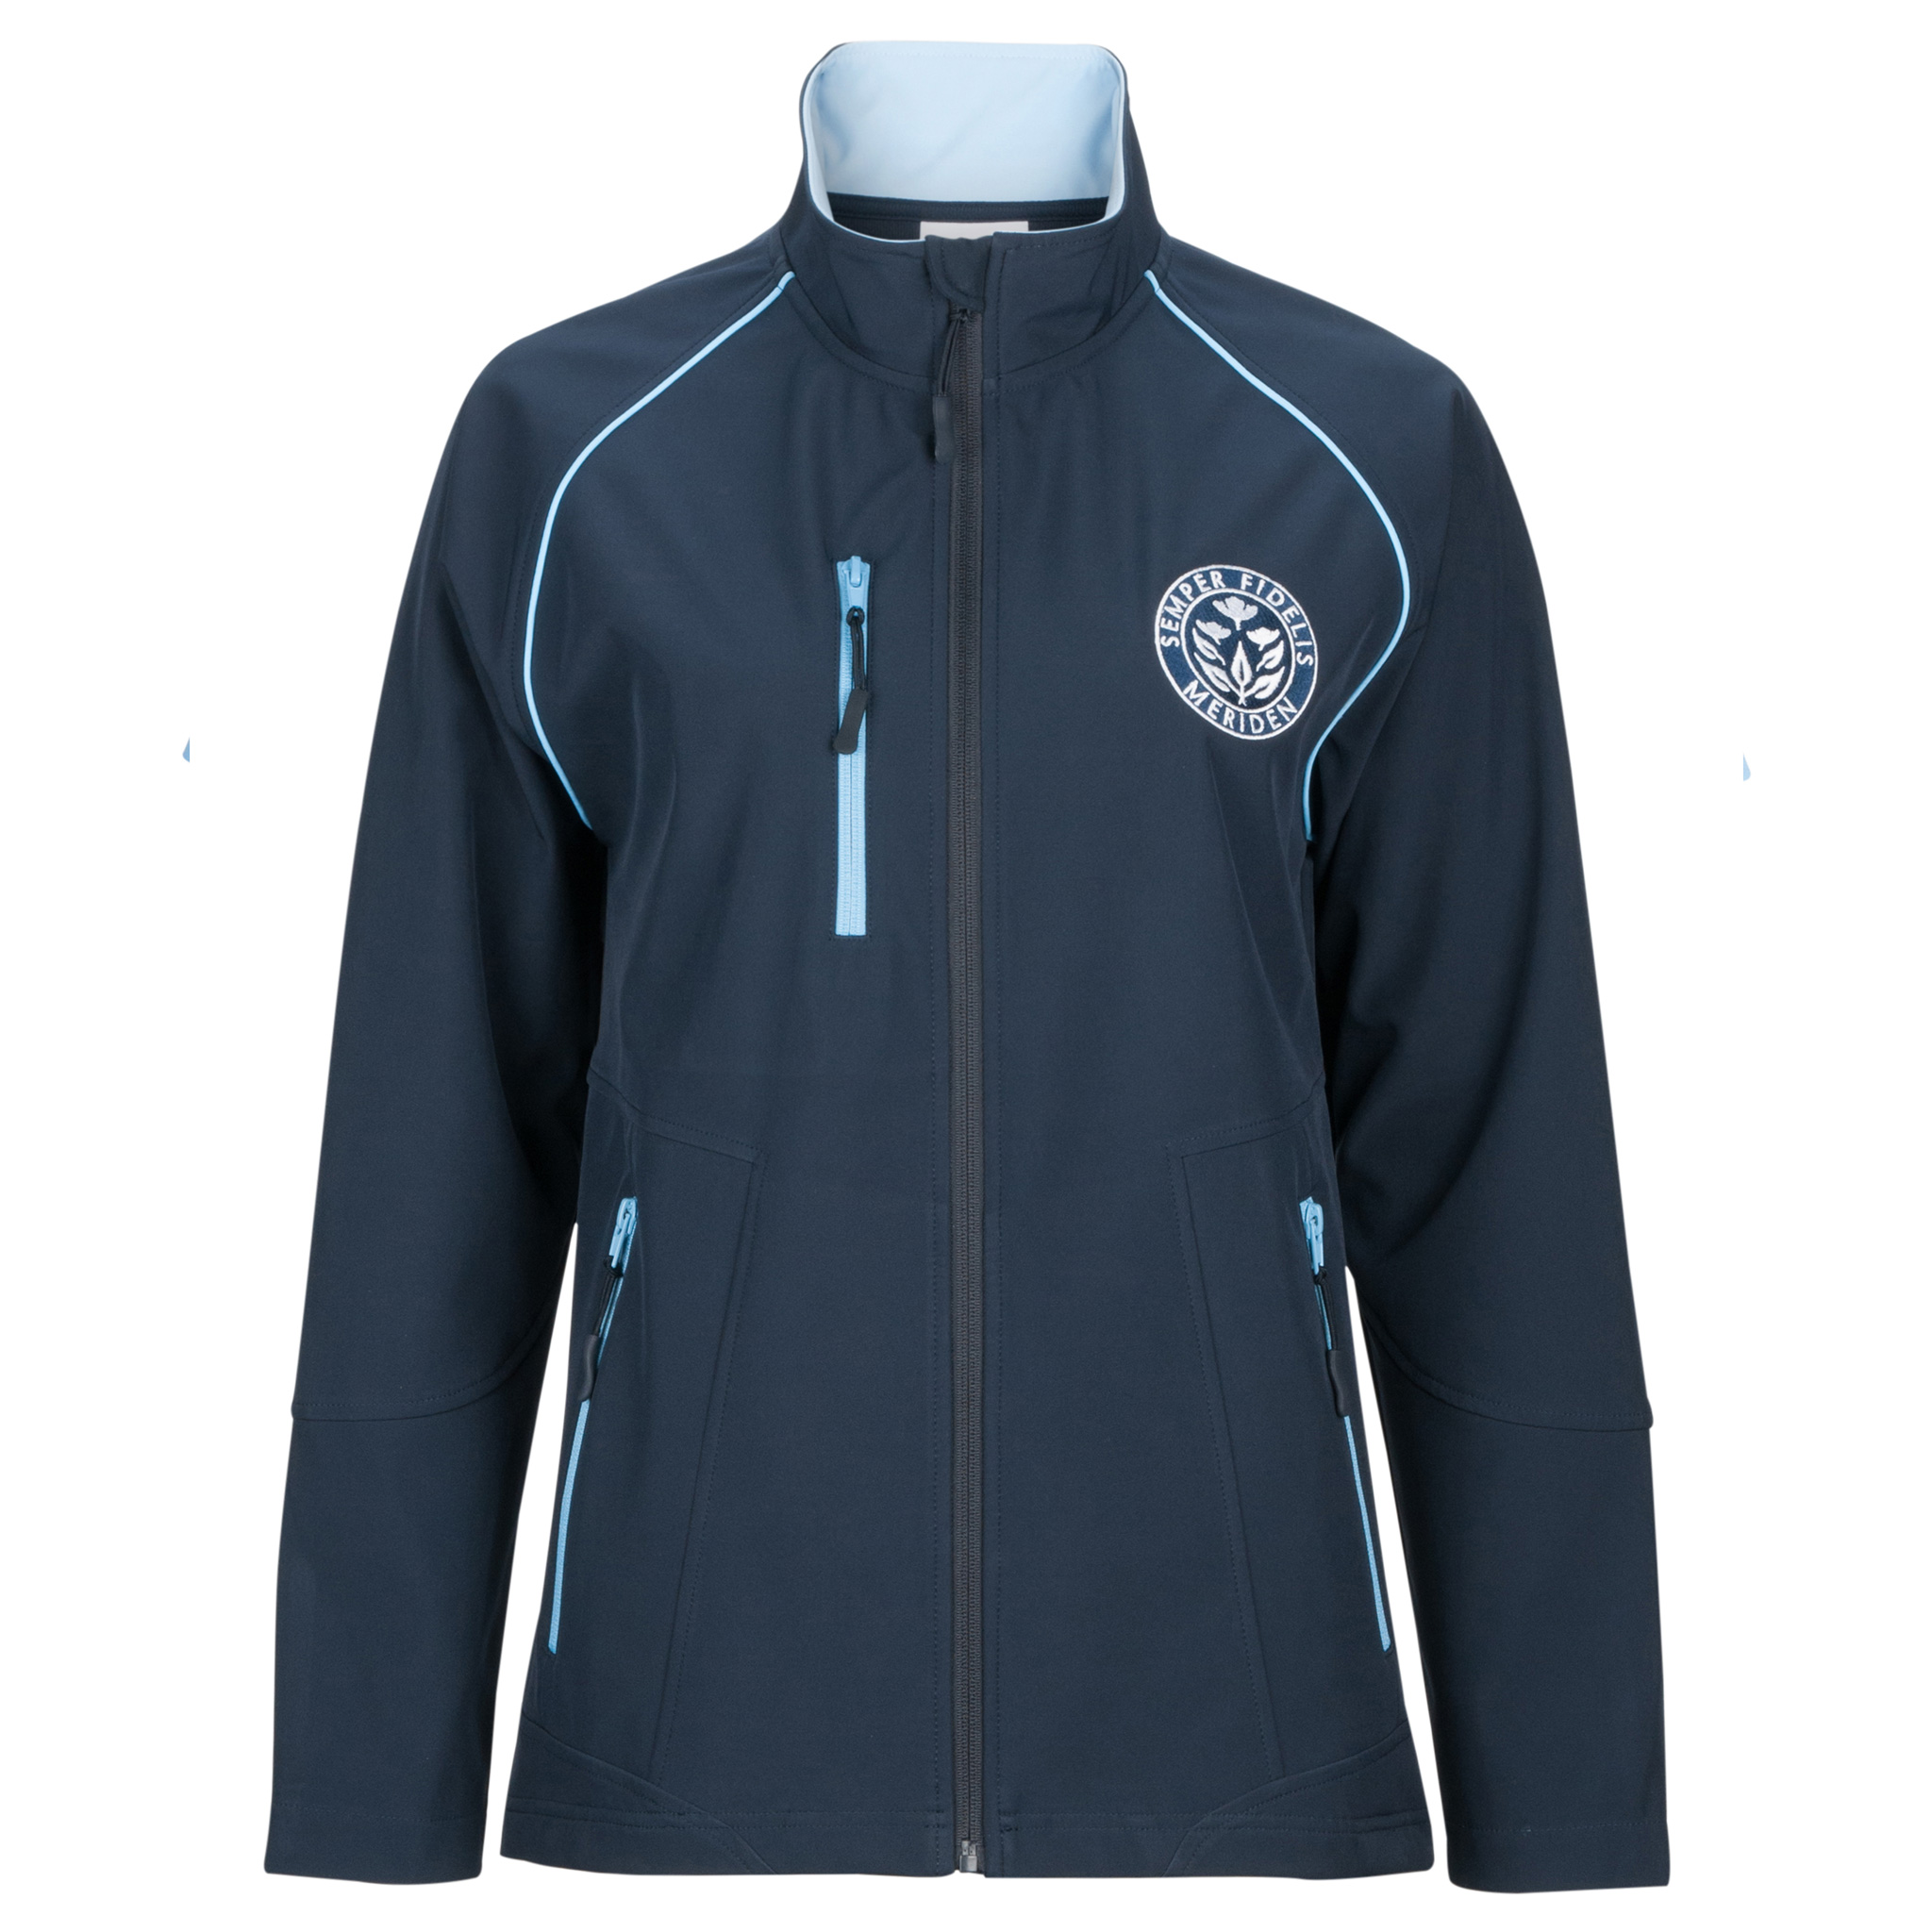 Jackets and Vests — OnTrack Sportswear | Custom Design Sportswear and ...